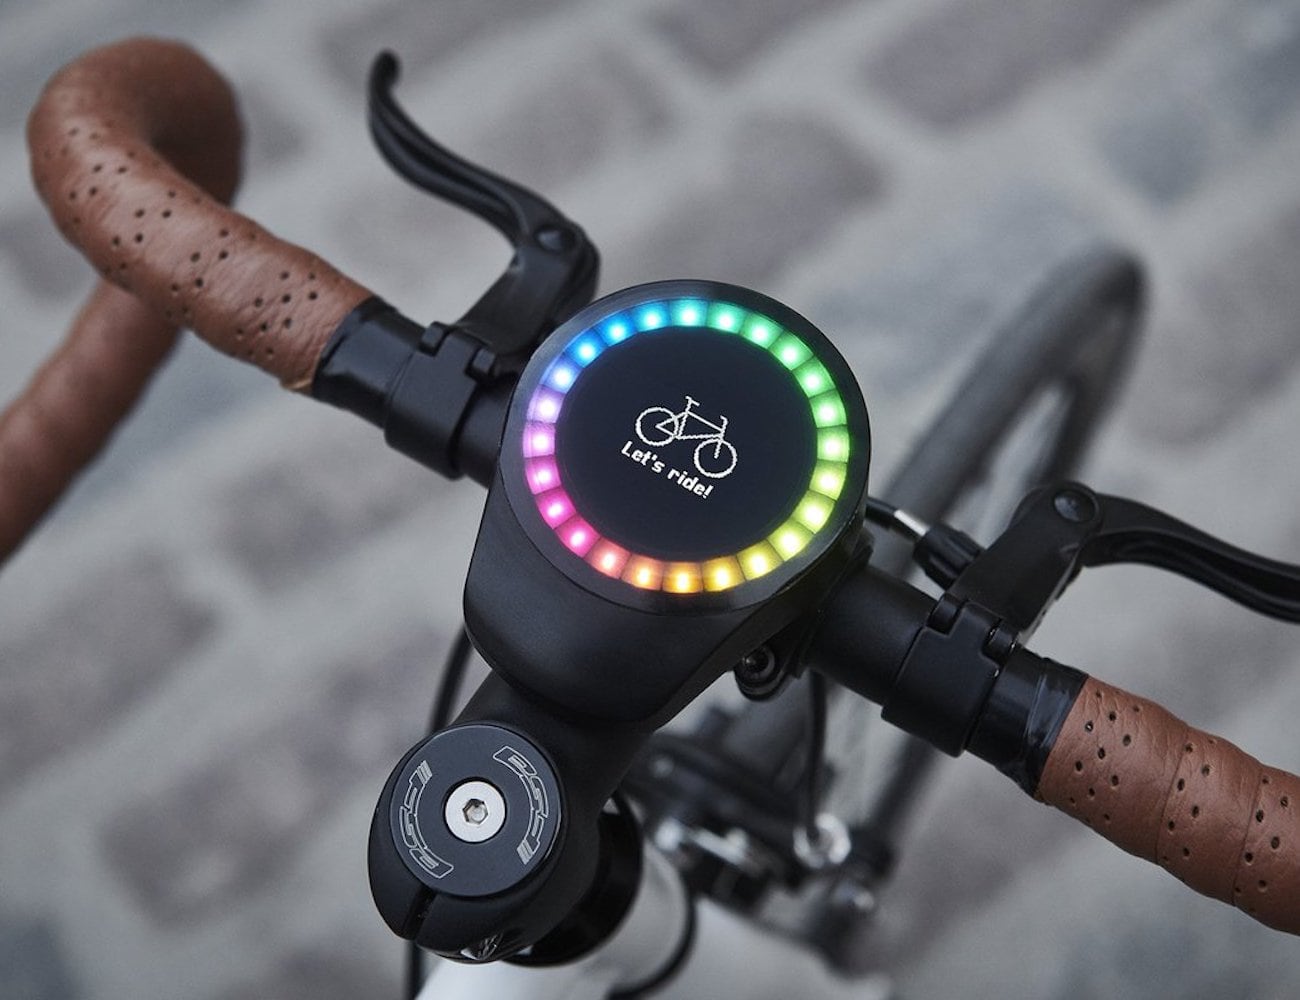 Make Commute Easier with These Bike and Gadgets